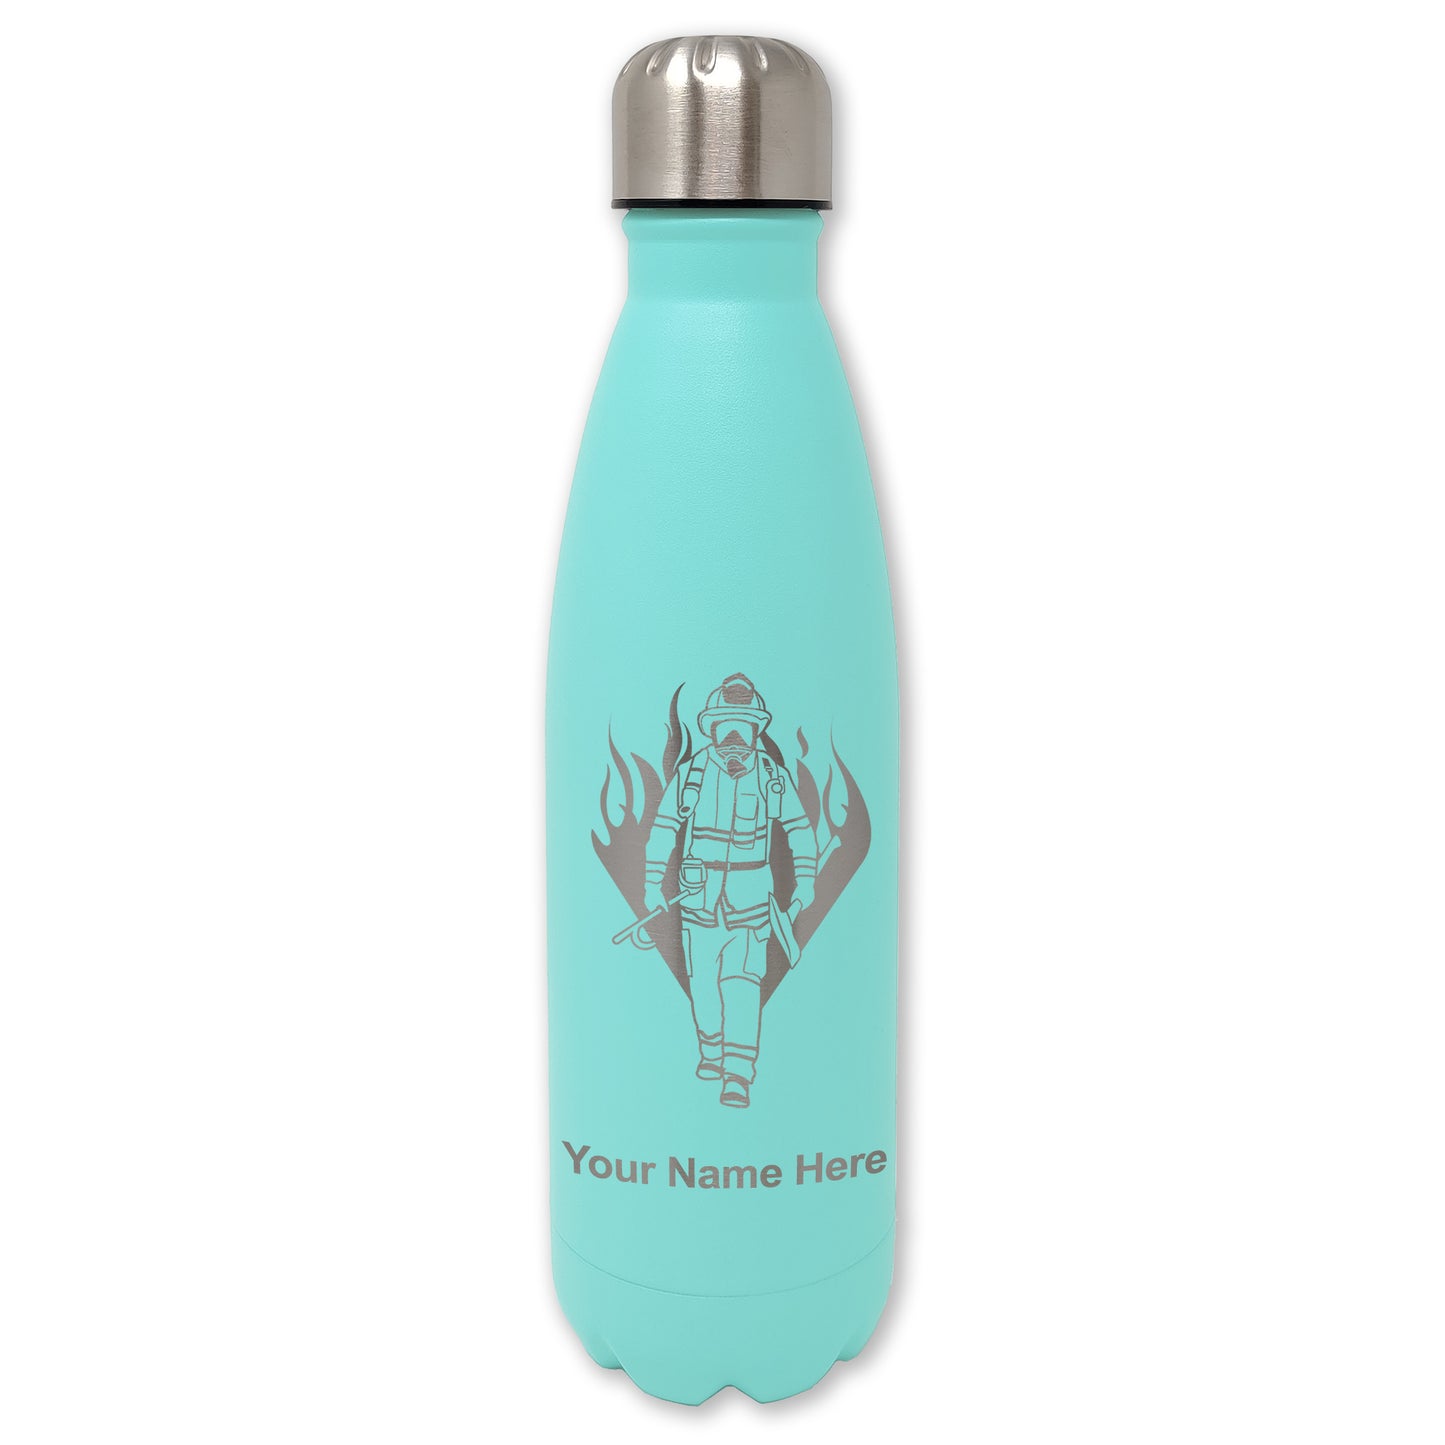 LaserGram Double Wall Water Bottle, Fireman, Personalized Engraving Included